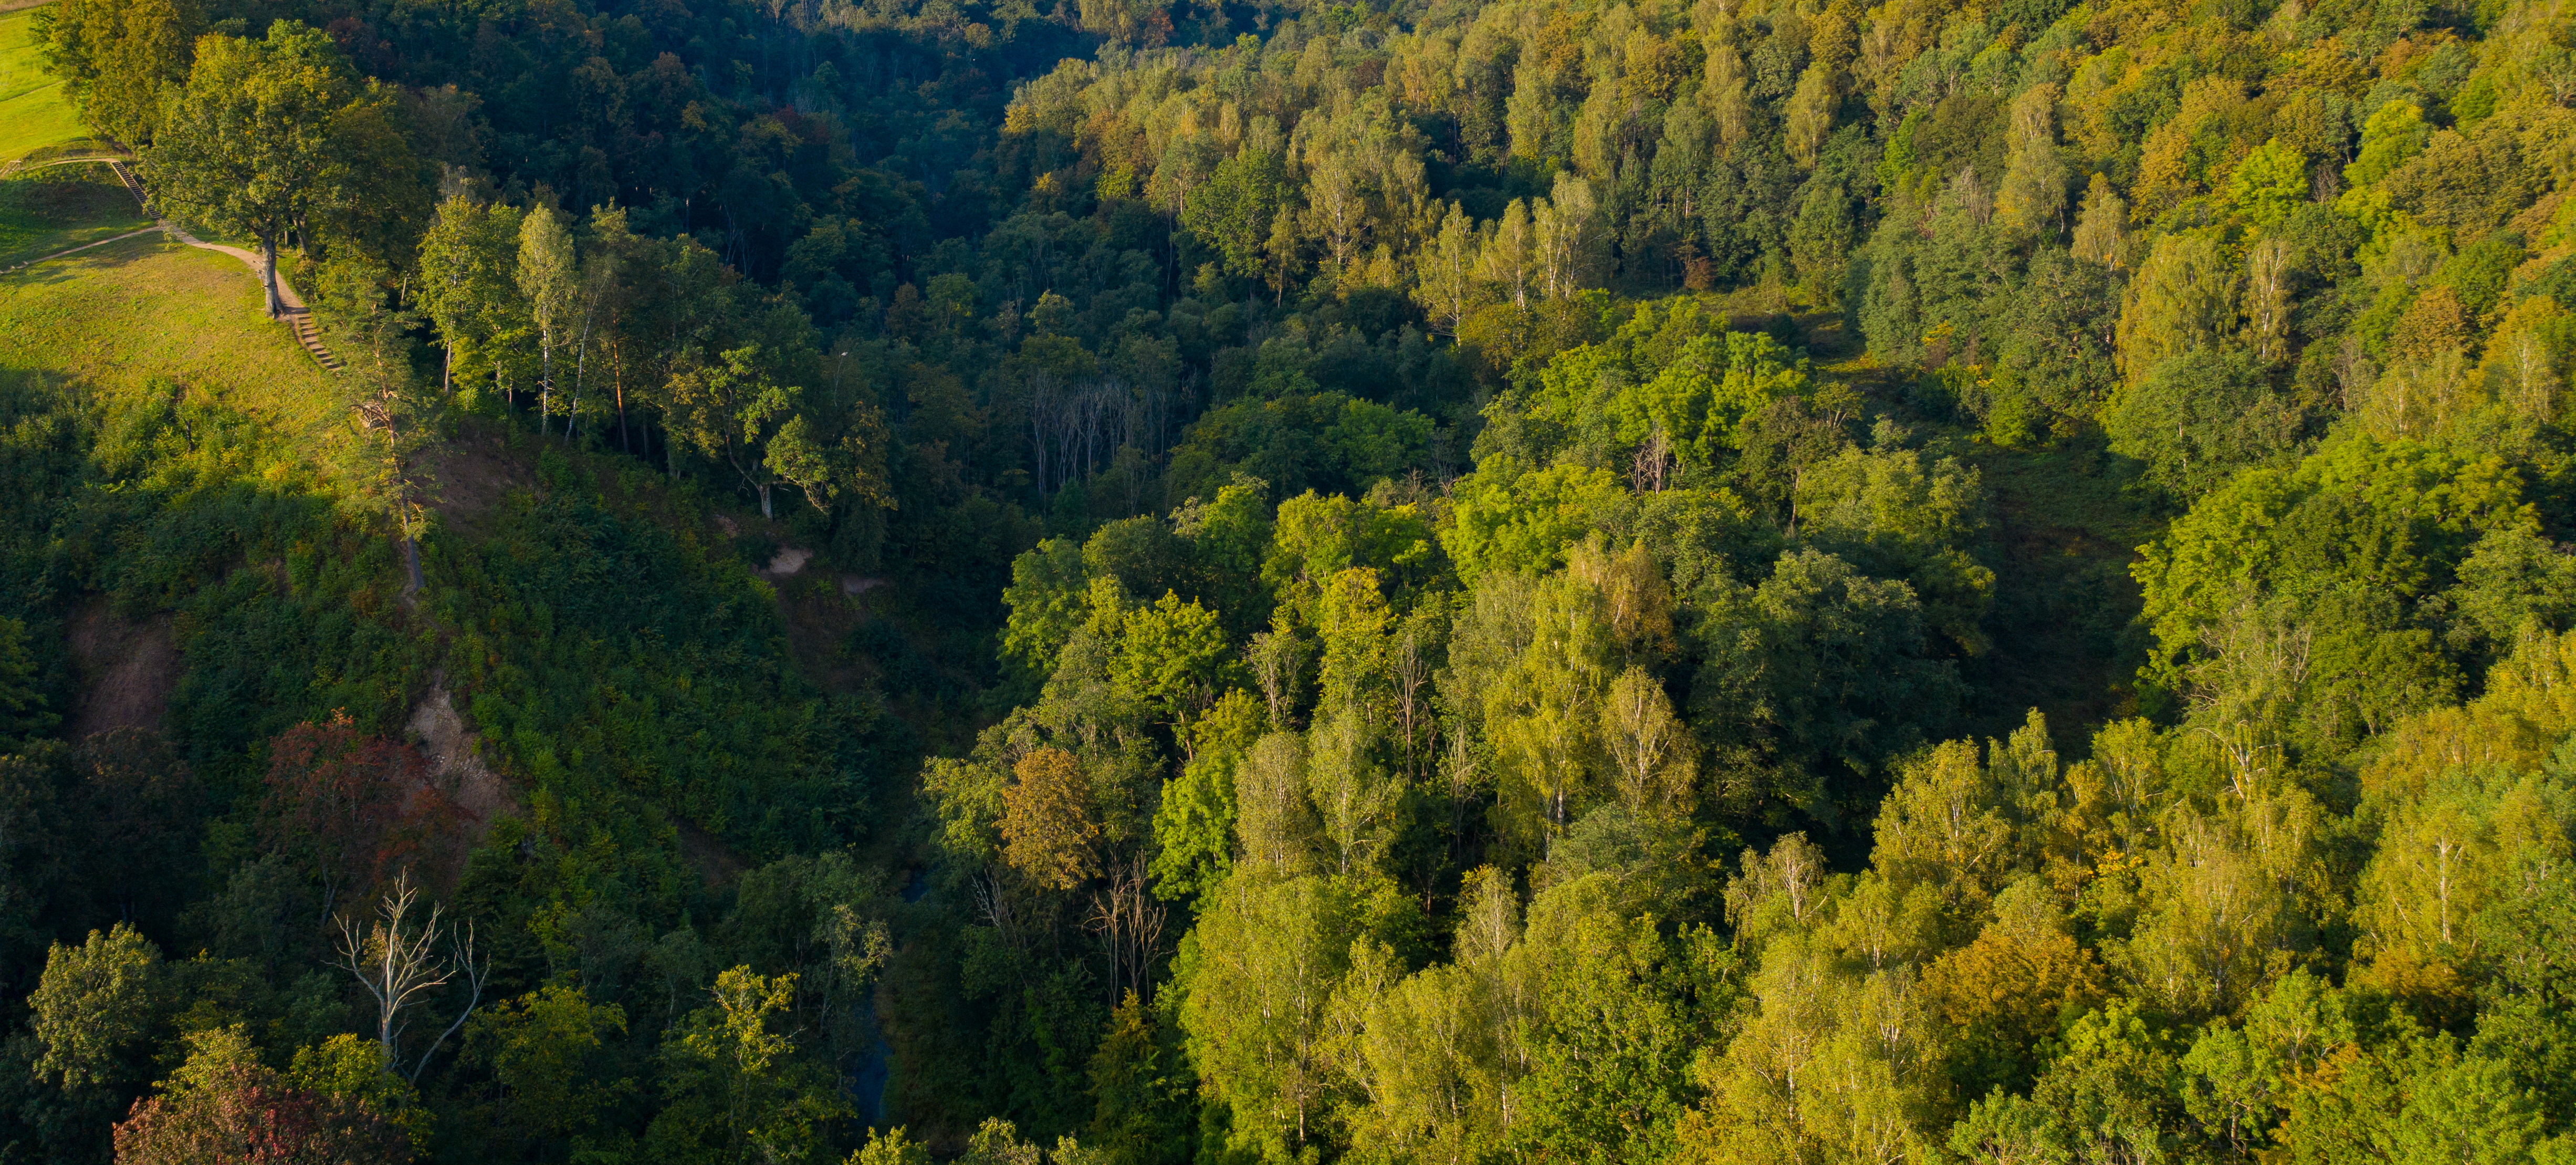 Bird's-eye view of a hilly forest